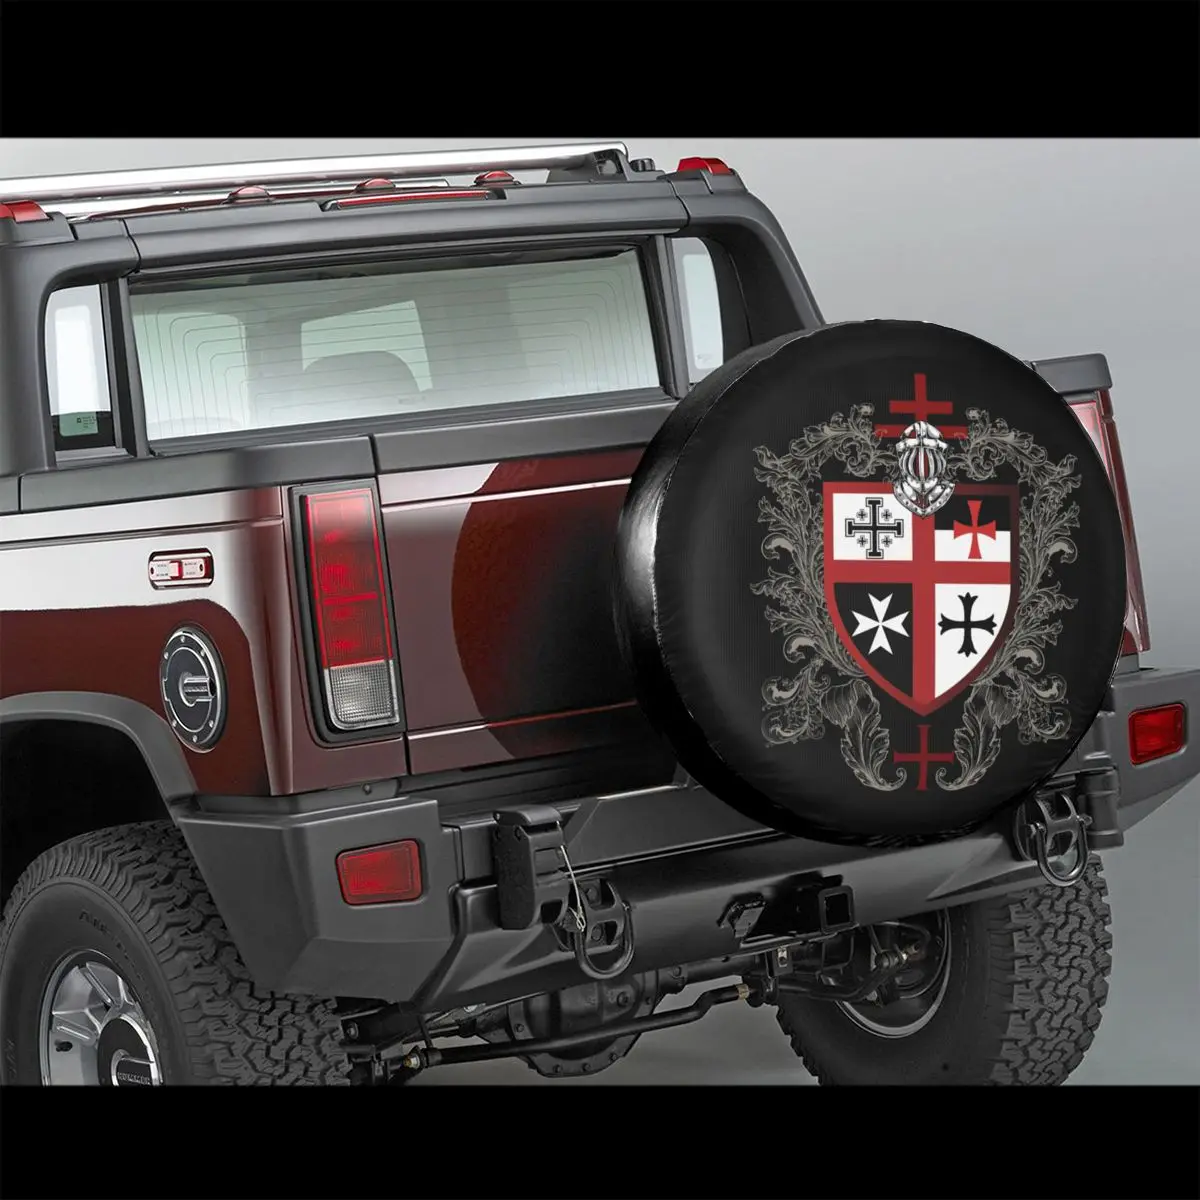 DSJsdfhskdzlp Knight Templar Cross Car Tire Cover Spare Wheel Tire Cover for Fit for Trailer SUV and Various Vehicles 14 15 16 17 Inch RV 